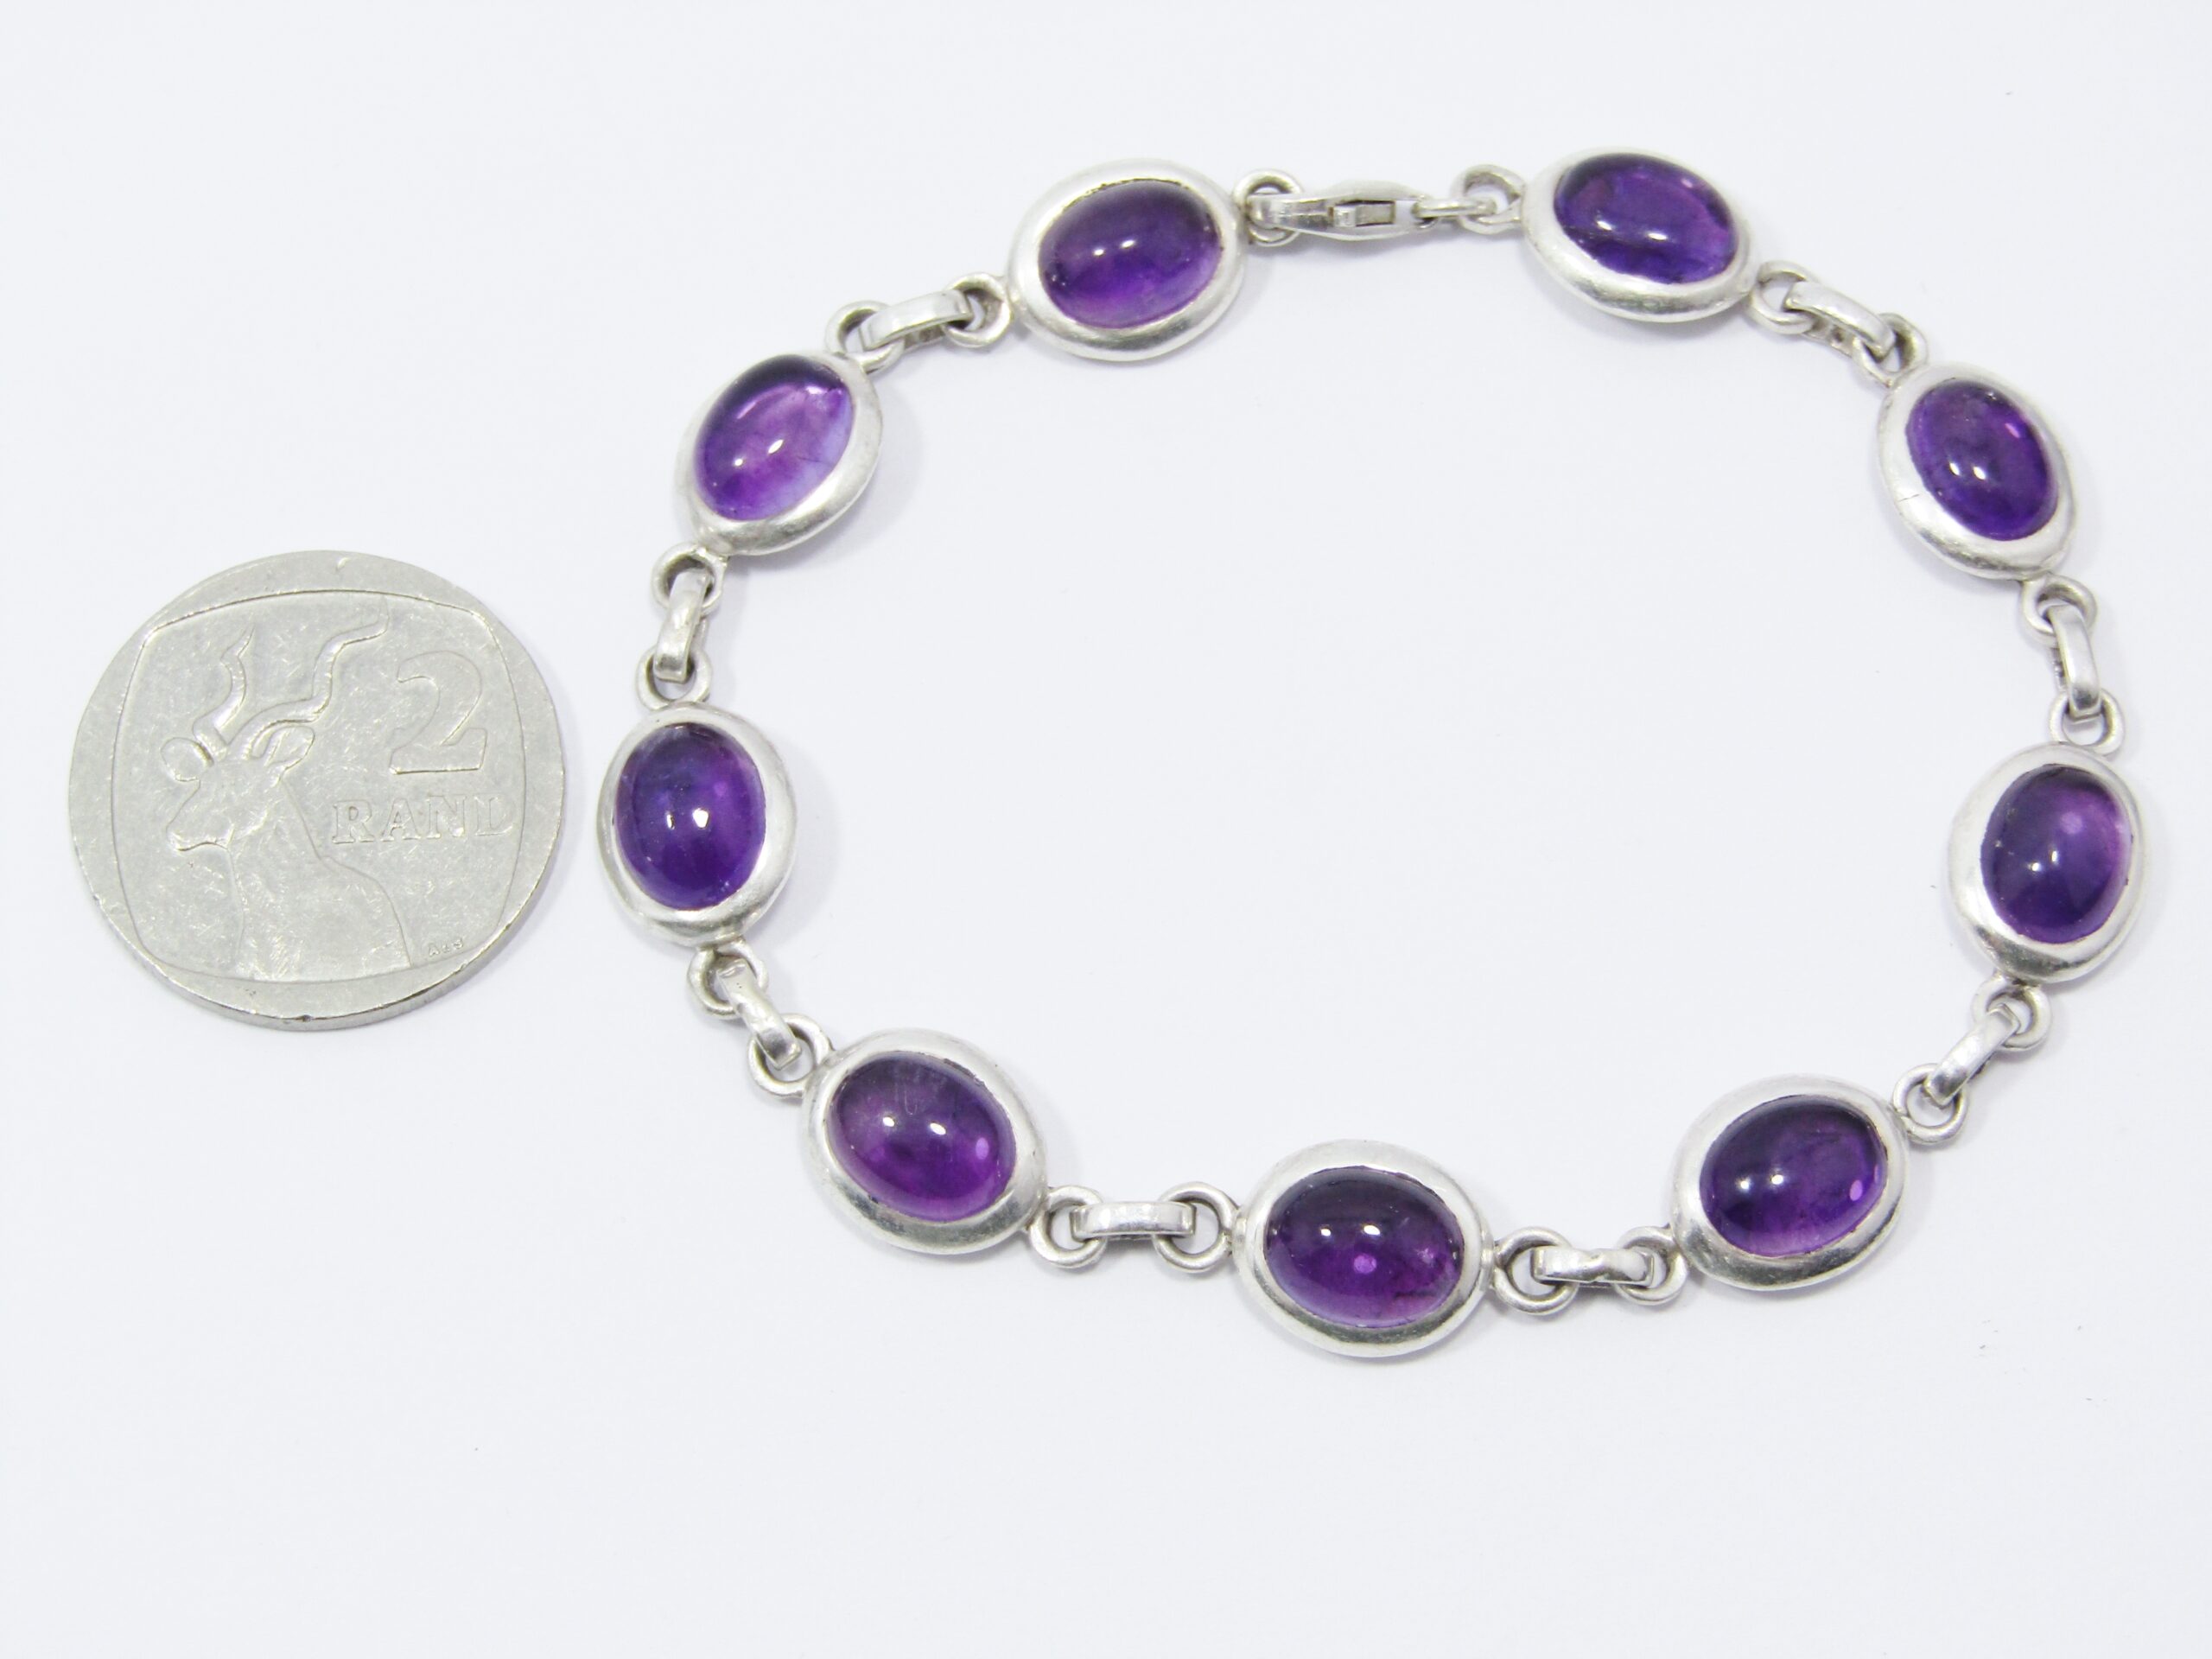 A Gorgeous Cabochon Amethyst Bracelet in Sterling Silver